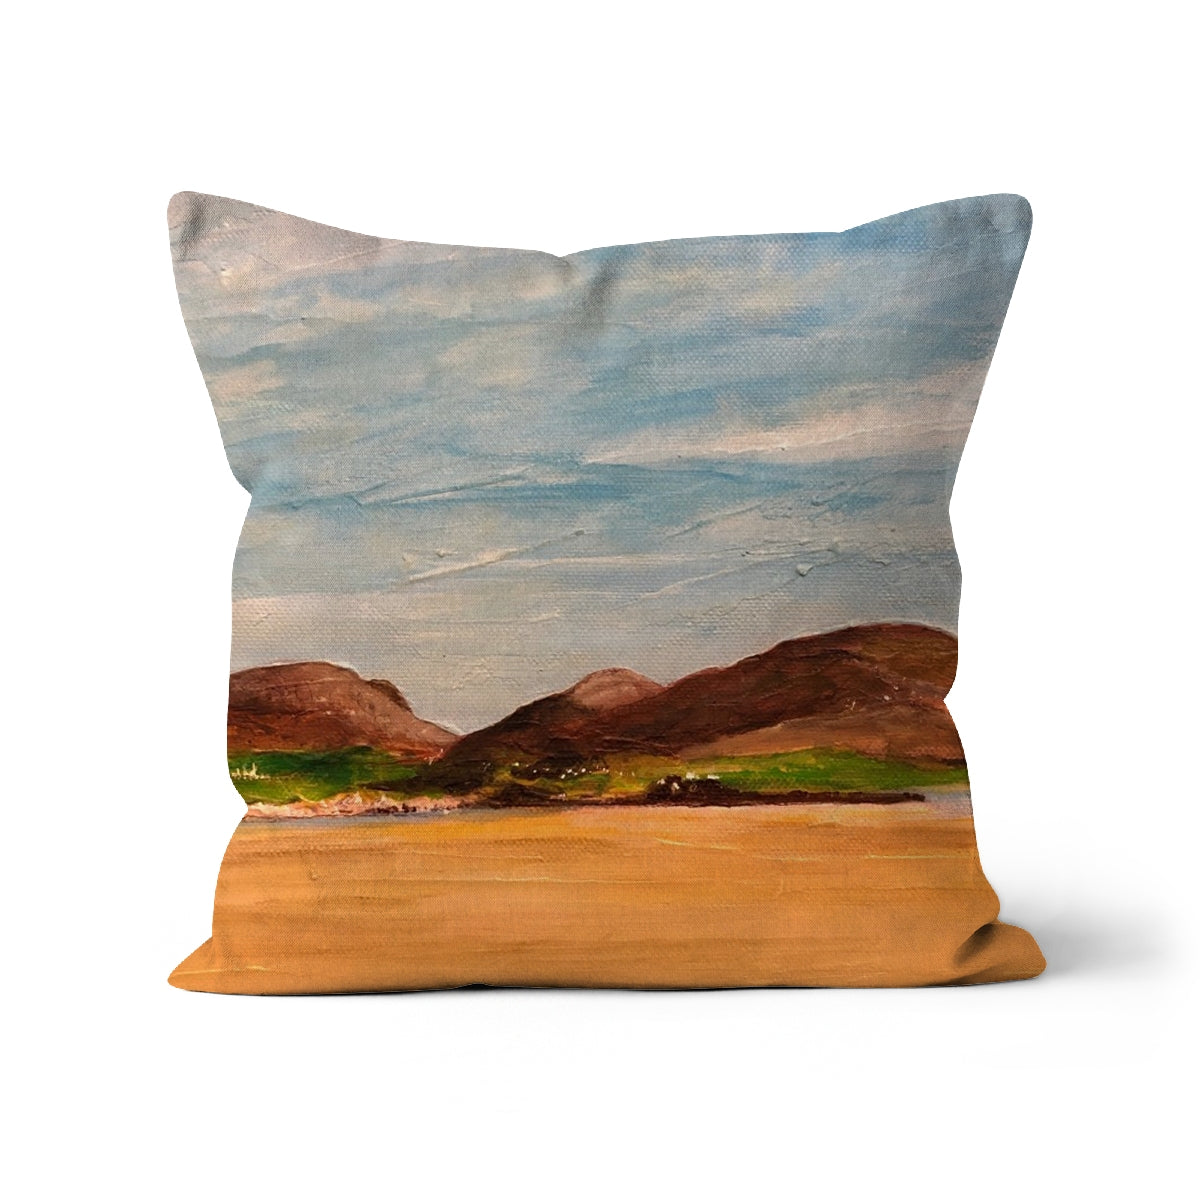 Uig Sands Lewis Art Gifts Cushion-Cushions-Hebridean Islands Art Gallery-Linen-16"x16"-Paintings, Prints, Homeware, Art Gifts From Scotland By Scottish Artist Kevin Hunter